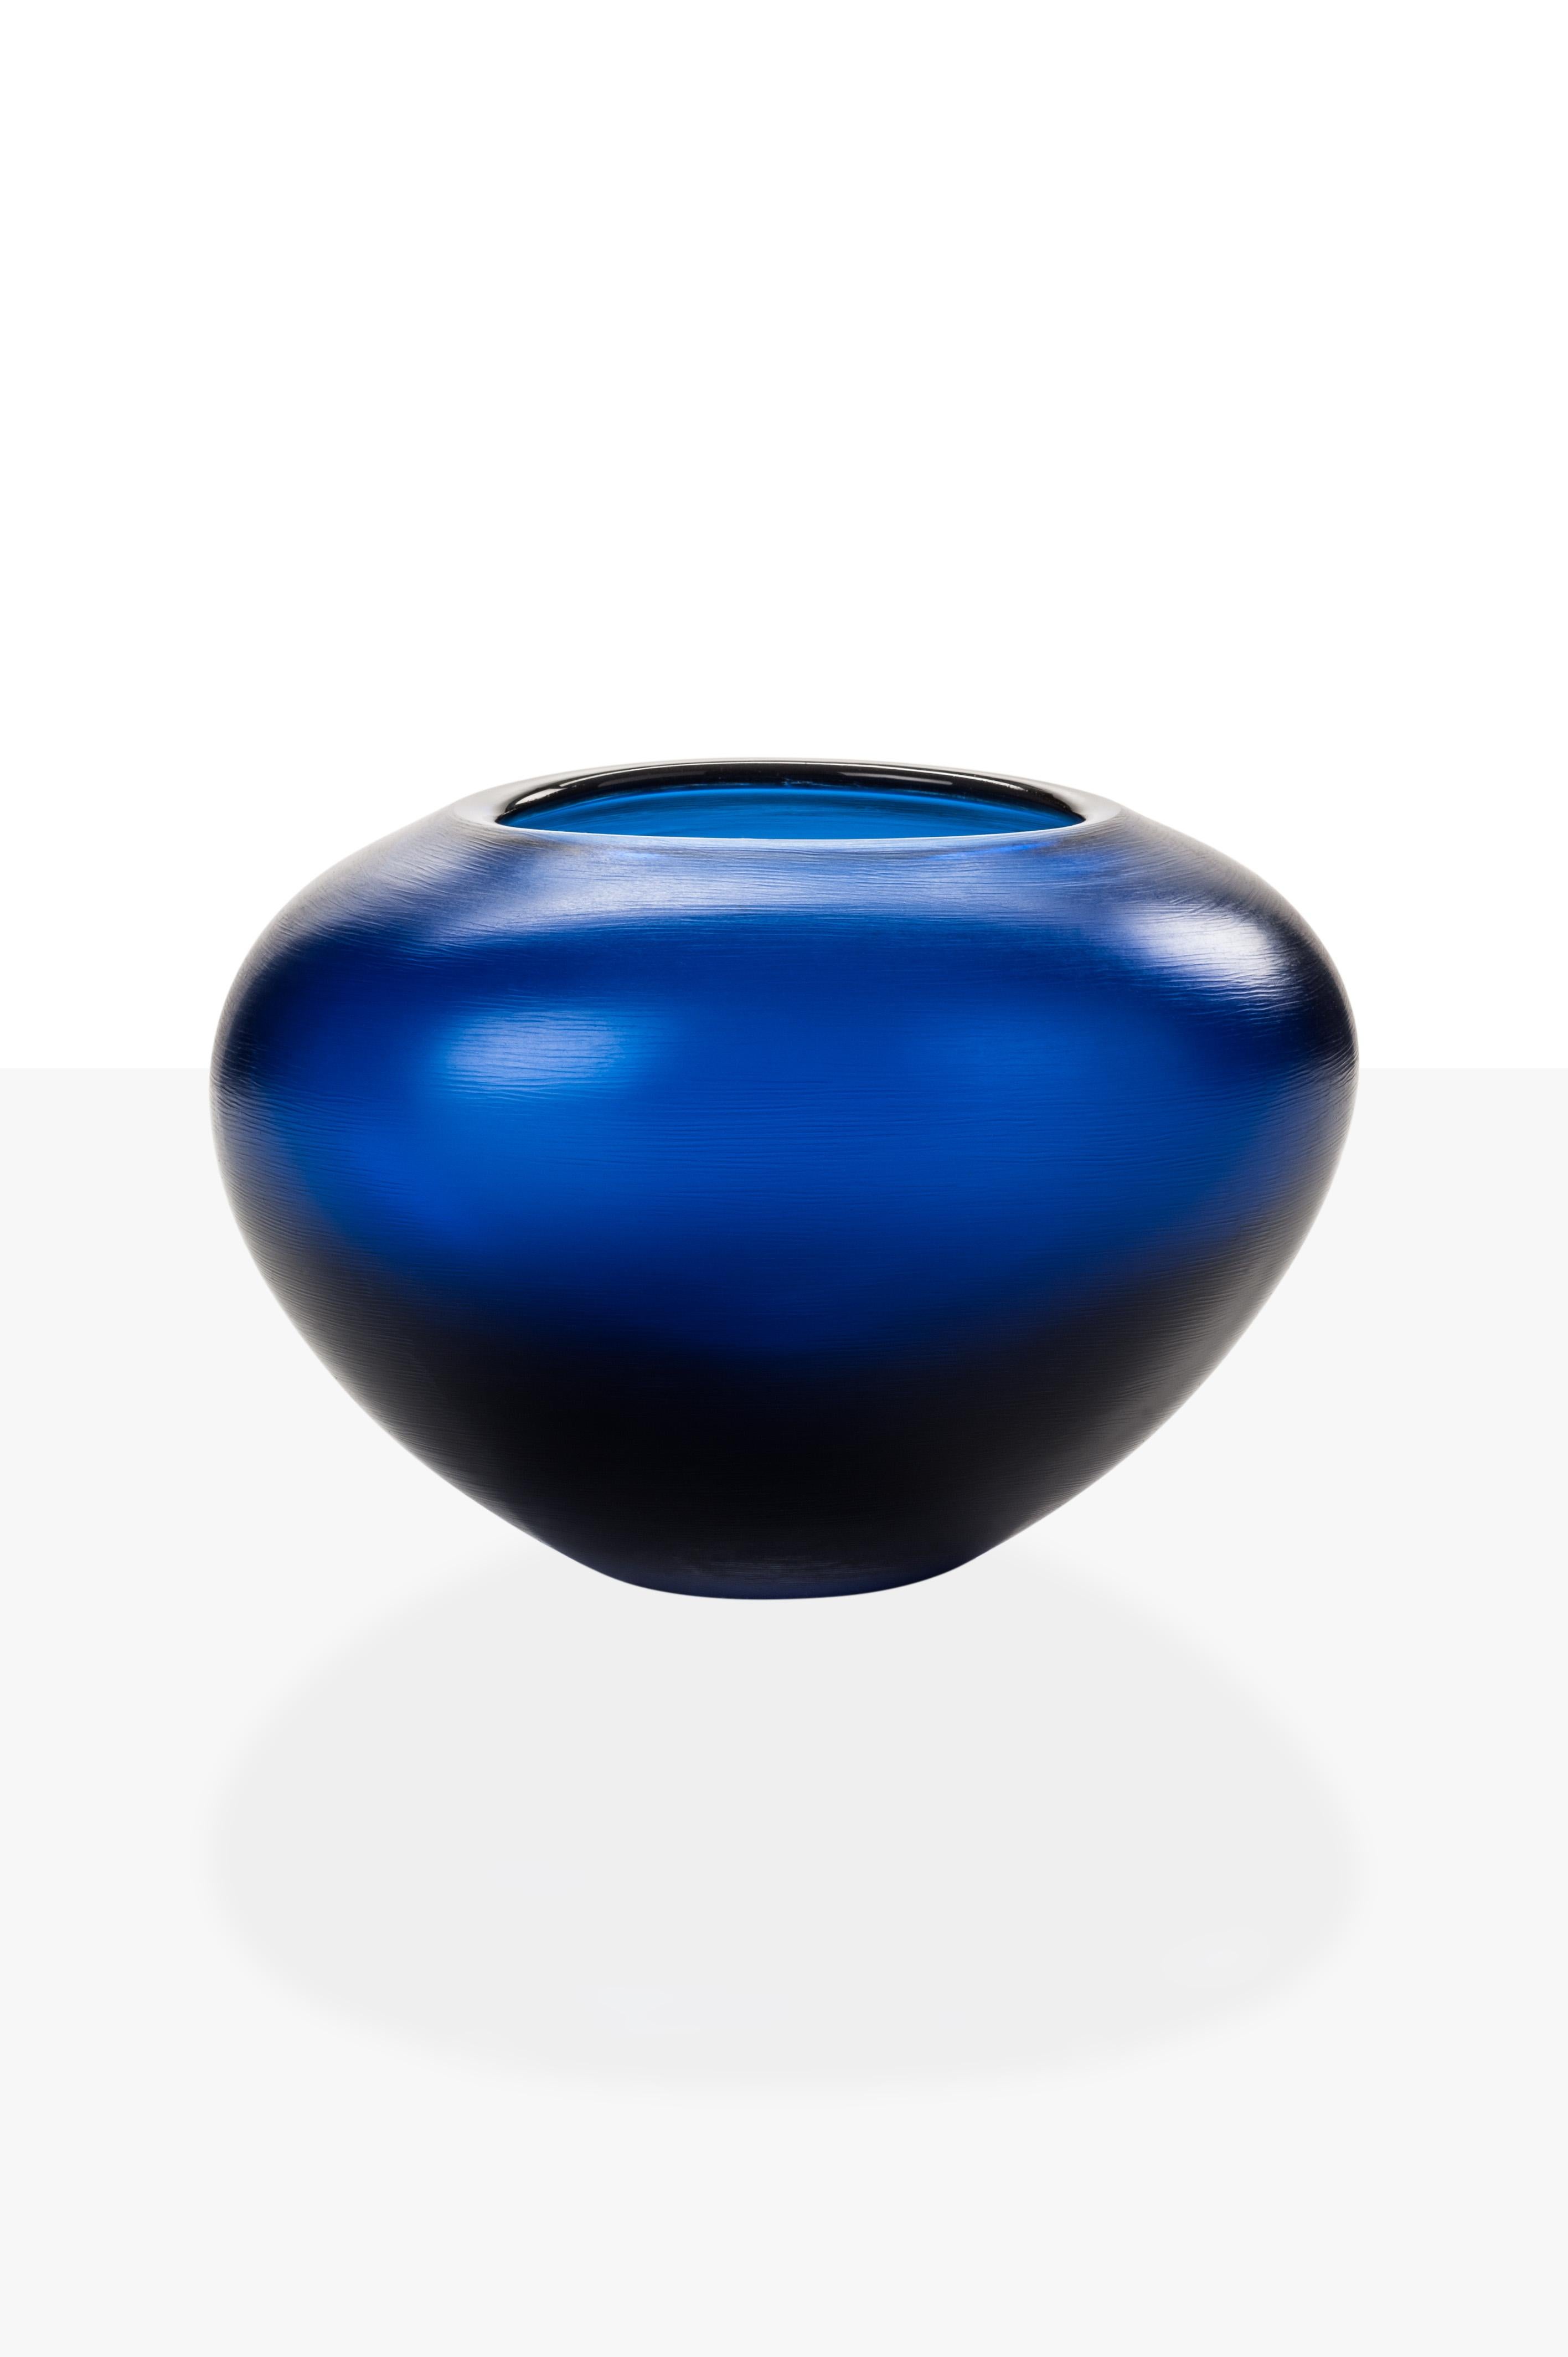 Incisi glass vase collection, designed by Paolo Venini and manufactured by Venini, feature an engraved surface. Originally designed in 1956. Numbered edition per year, marine blue versions are available in a limited edition of 19 art pieces. Indoor